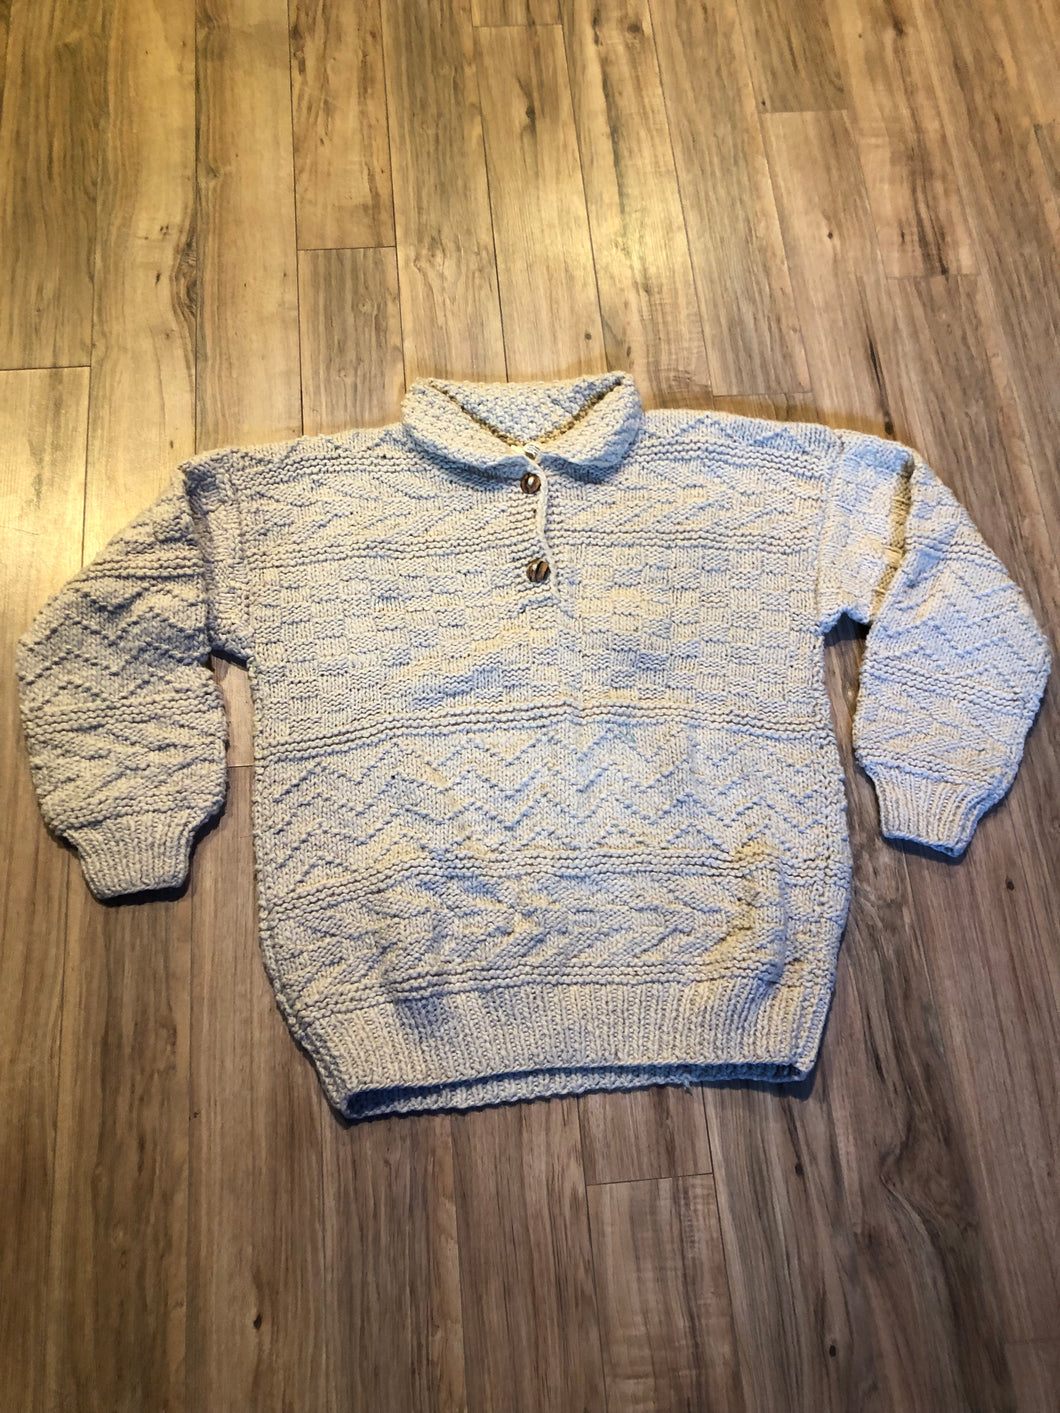 Kingspier Vintage - Vintage 100% wool quarter button pullover sweater featuring wooden buttons.

Made in Ecuador.
Size large.XL.